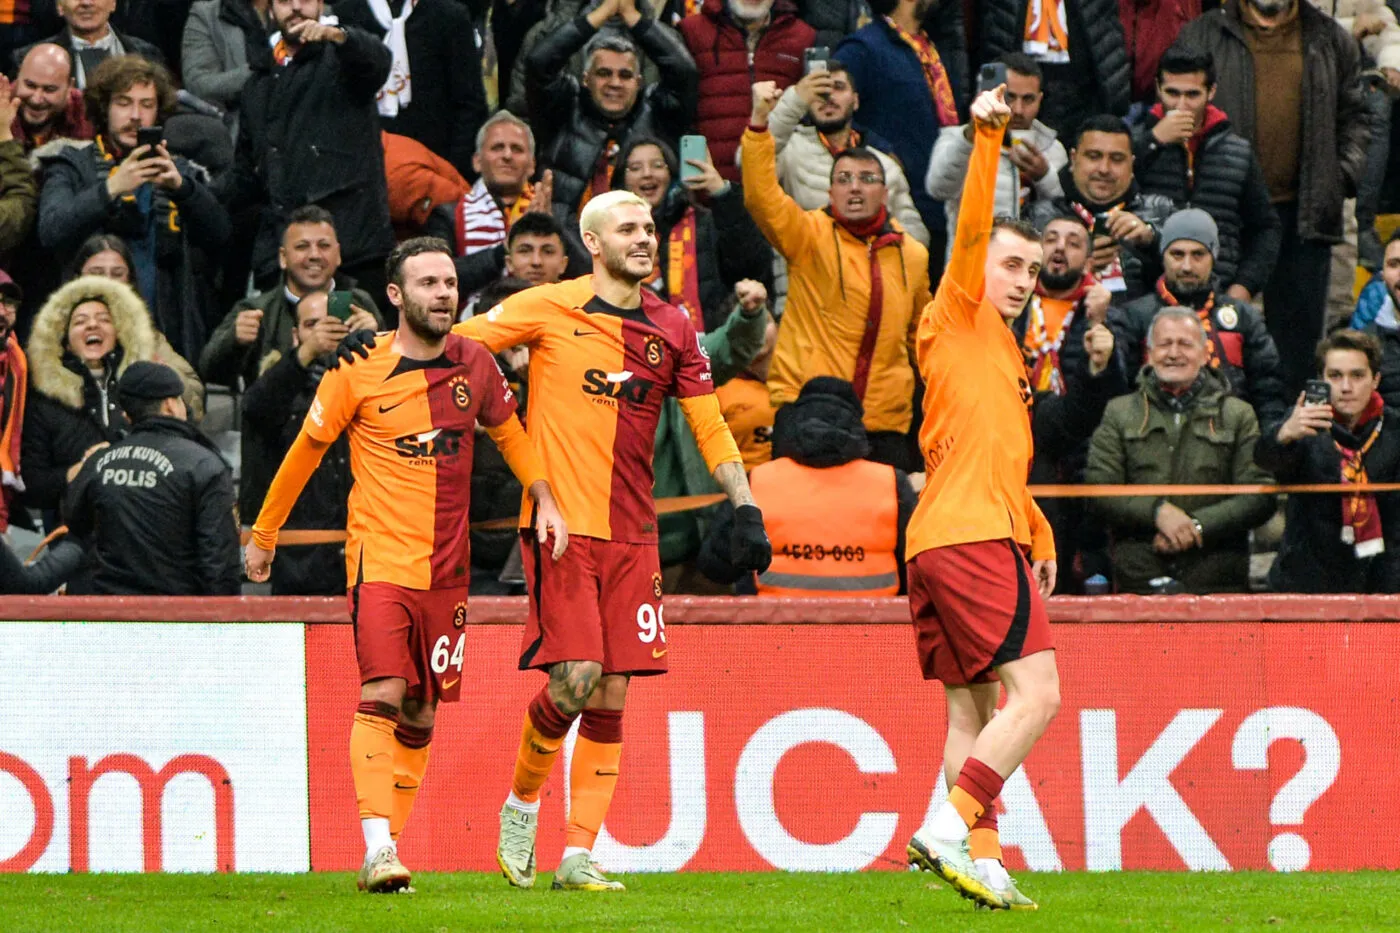 Juan Mata #64 of Galatasaray celebrates after scoring the second goal of his team with Mauro Icardi #99 and Kerem Akturkoglu #7 during the Turkish Super League match between Galatasaray and Hatayspor at NEF Stadium in Istanbul, Turkey on January 13, 2023. (Photo by Seskimphoto) - Photo by Icon sport